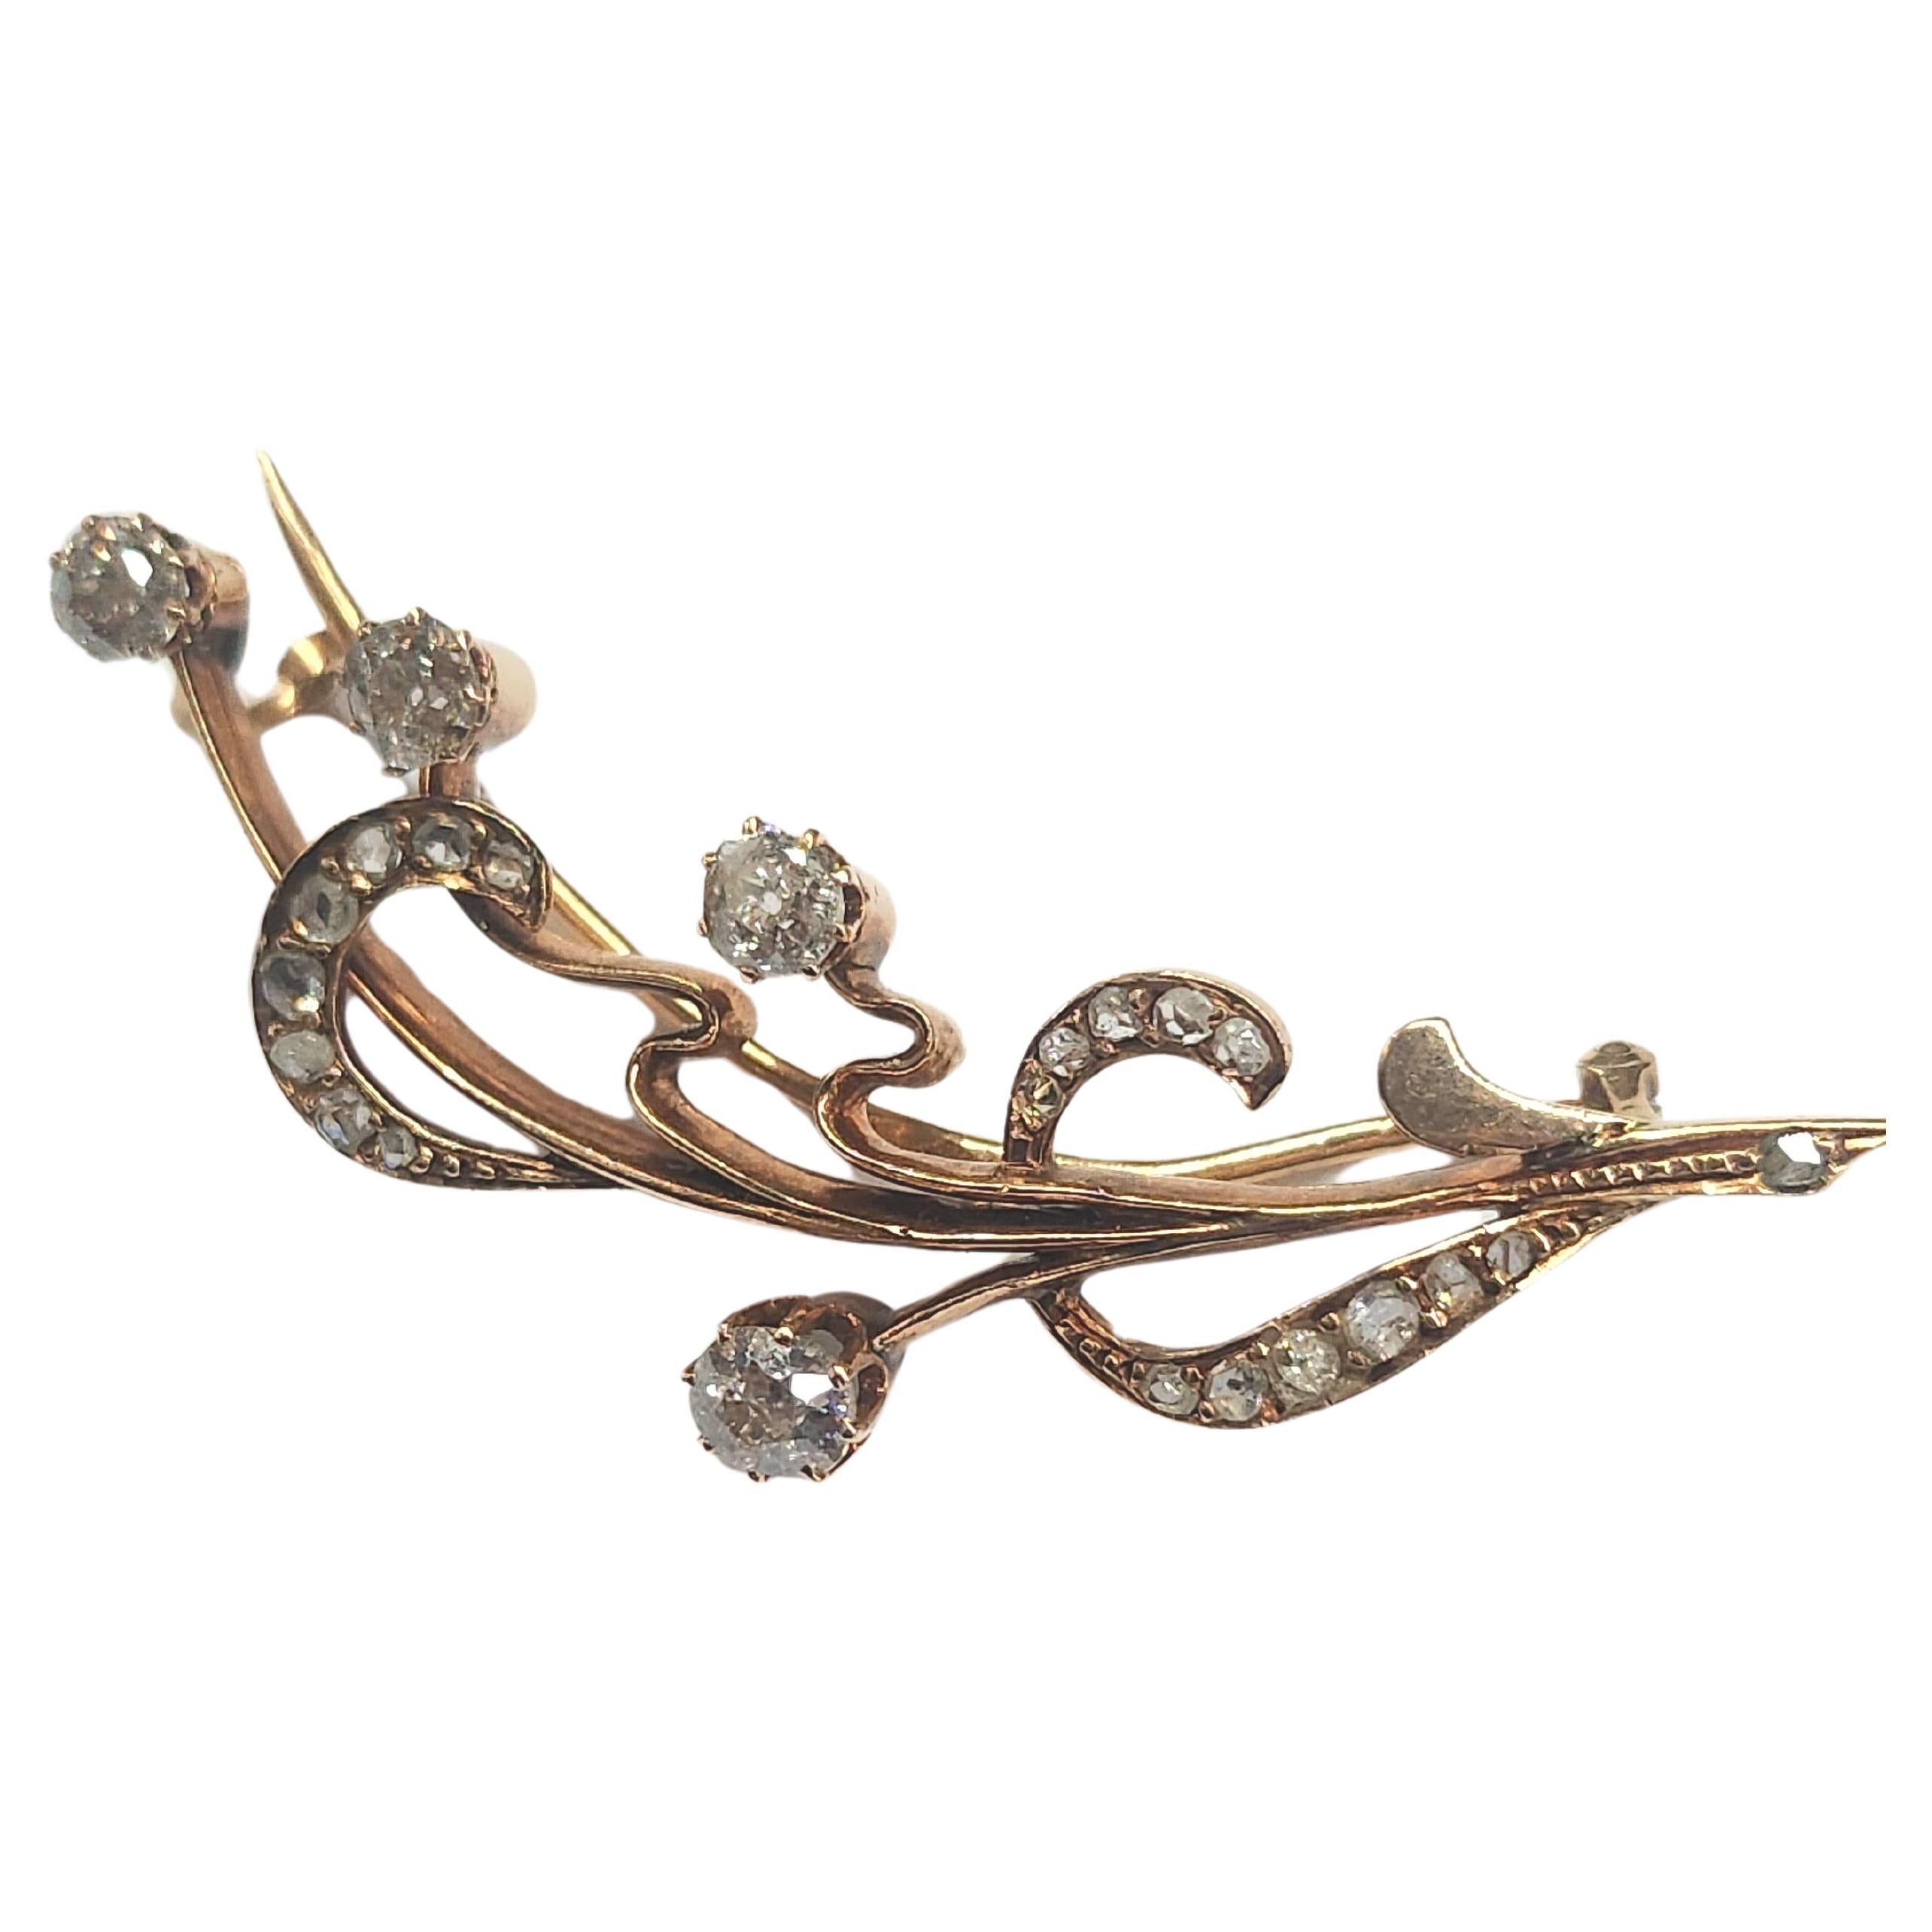 Antique imperial russian era 14k gold brooch in lily of the valley designe with estimate old mine cut diamonds weight of 1.50 carats hall marked with initial maker mark in cyrtllic alphabet and assayer mark and later with 583 gold standard 